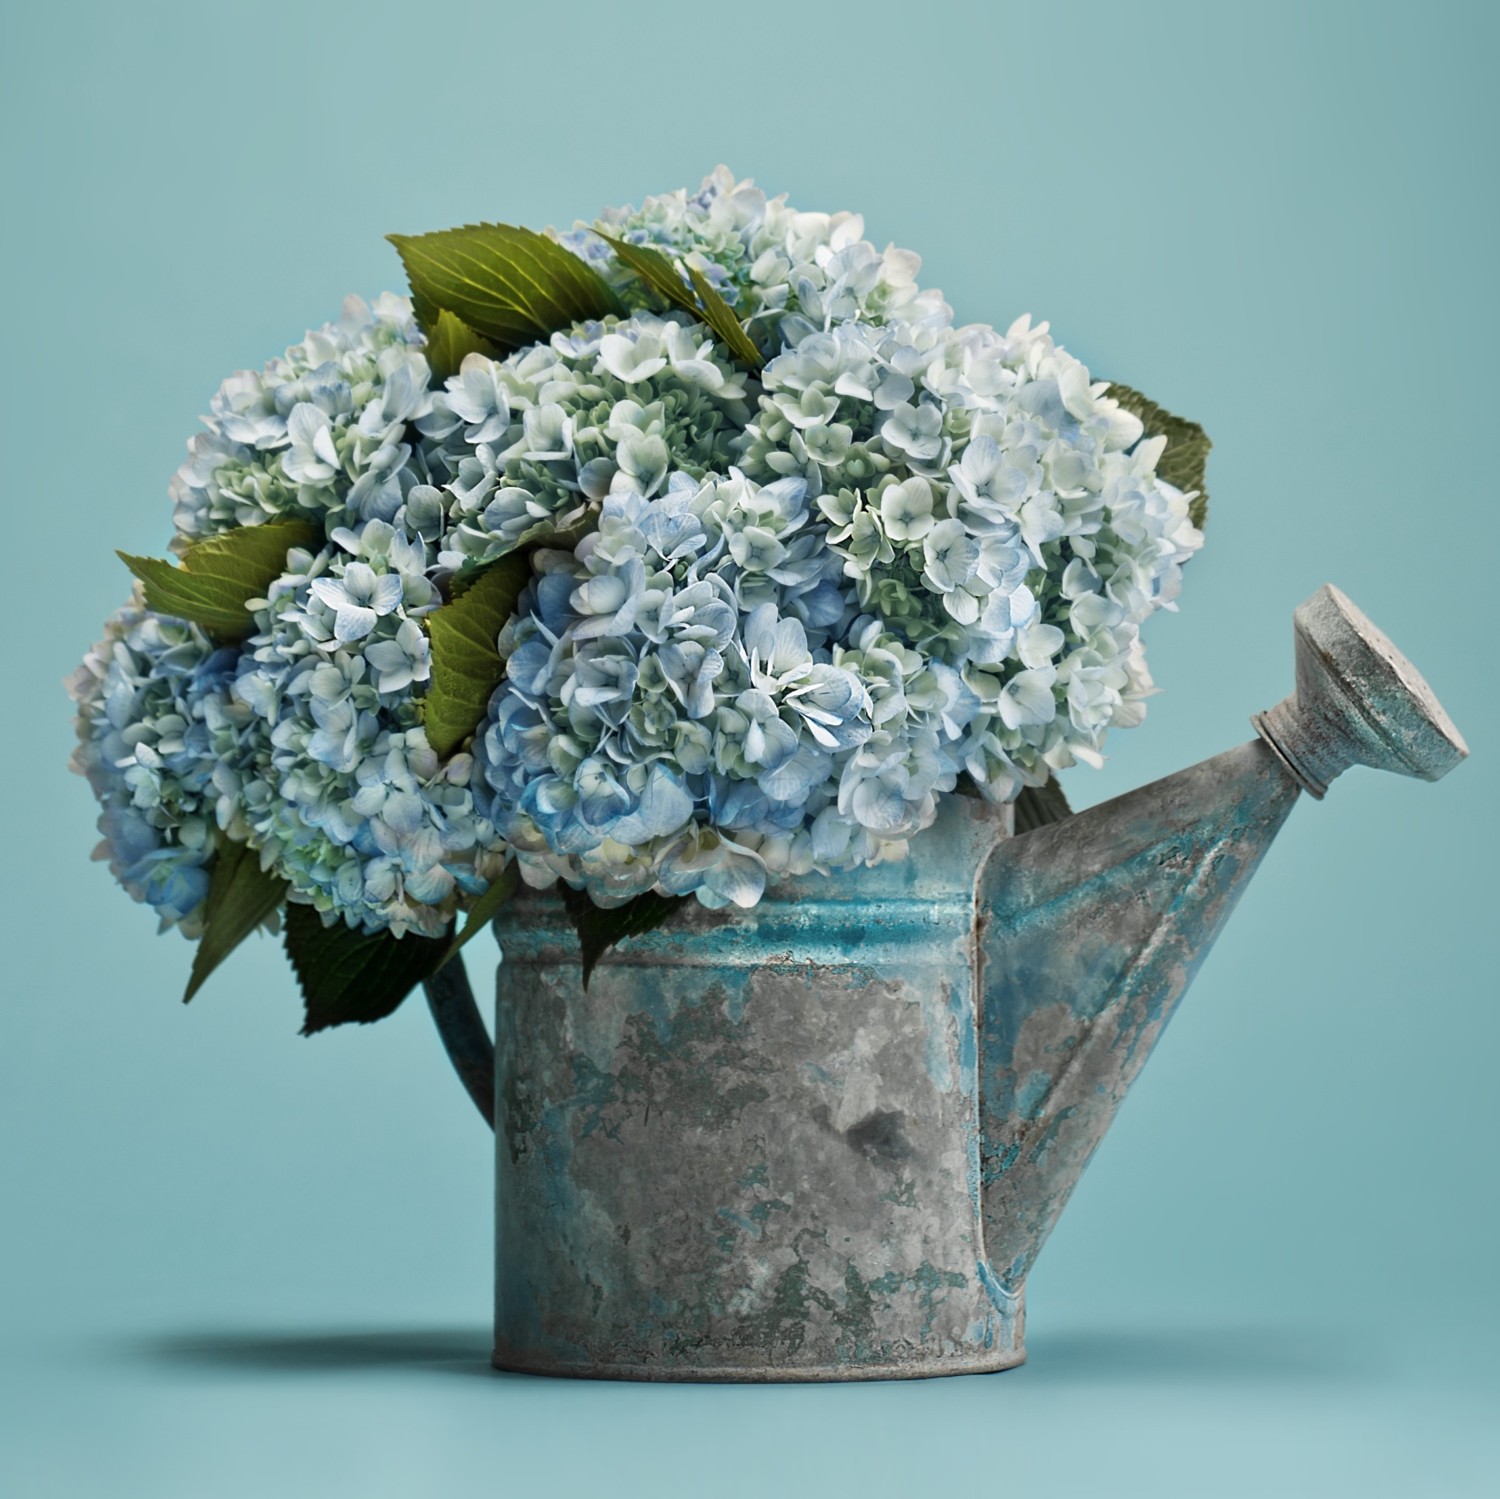 A weathered, blue-patinated watering can holds a blue hydrangea arrangement.